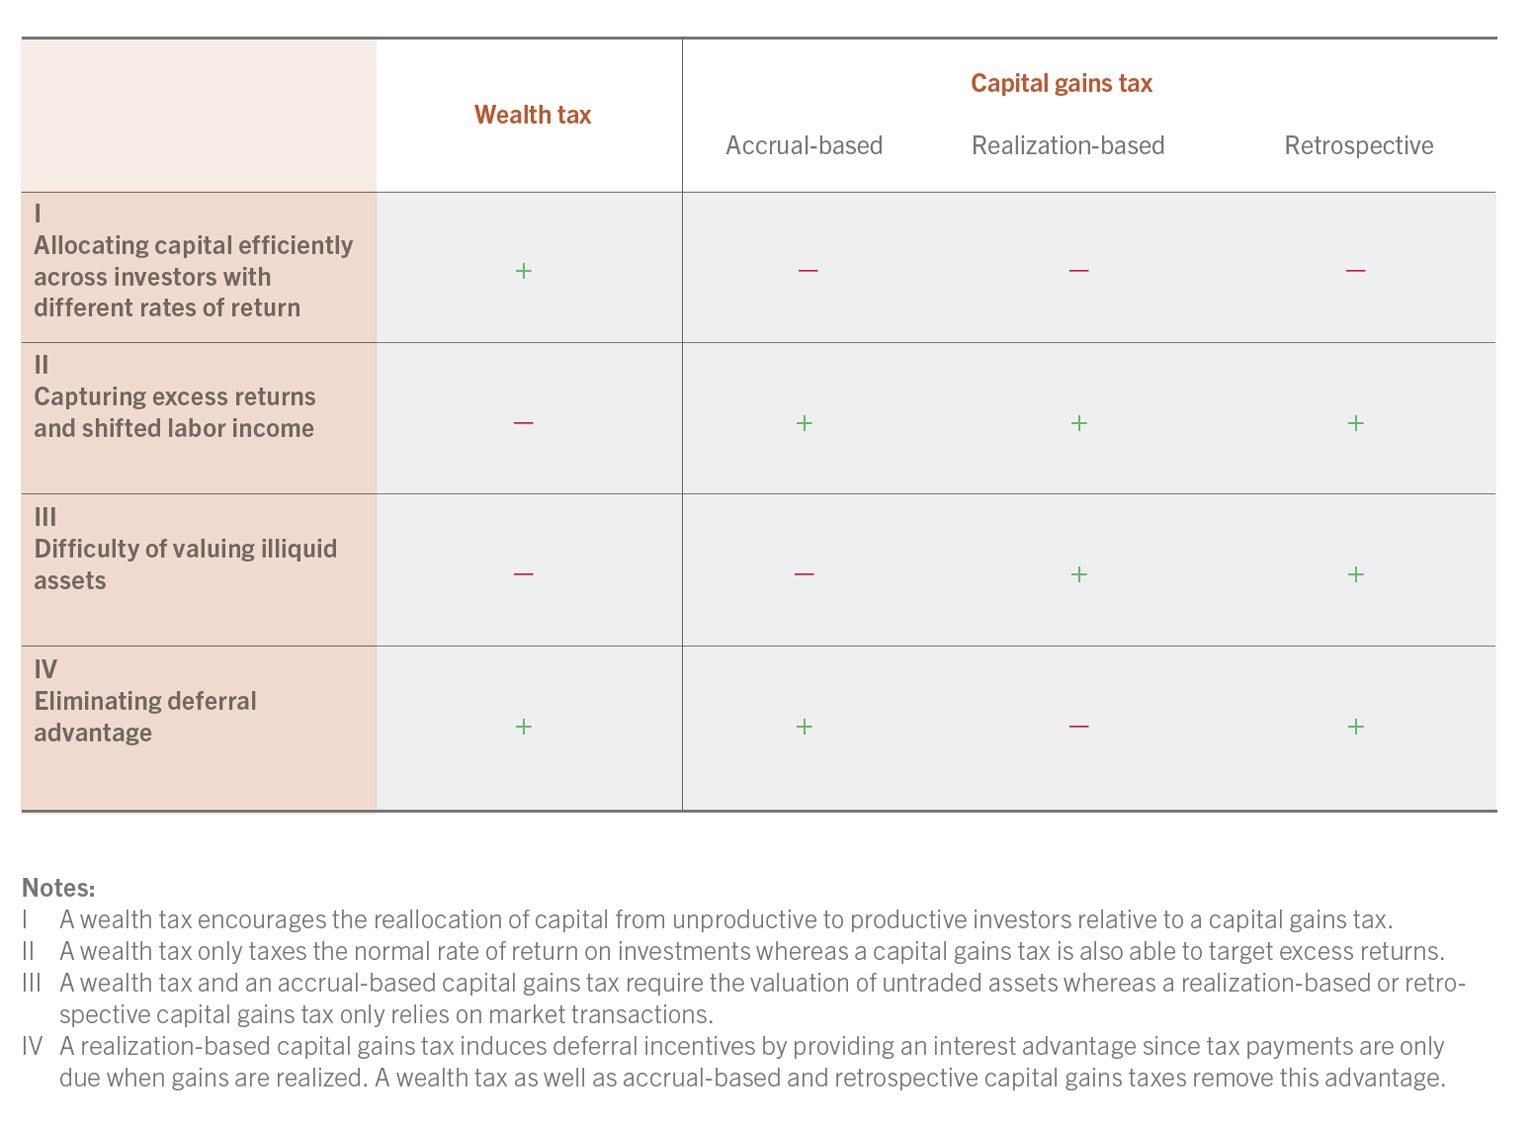 Overview of the pros and cons of wealth versus capital gains taxes, source: Scheuer (2020)